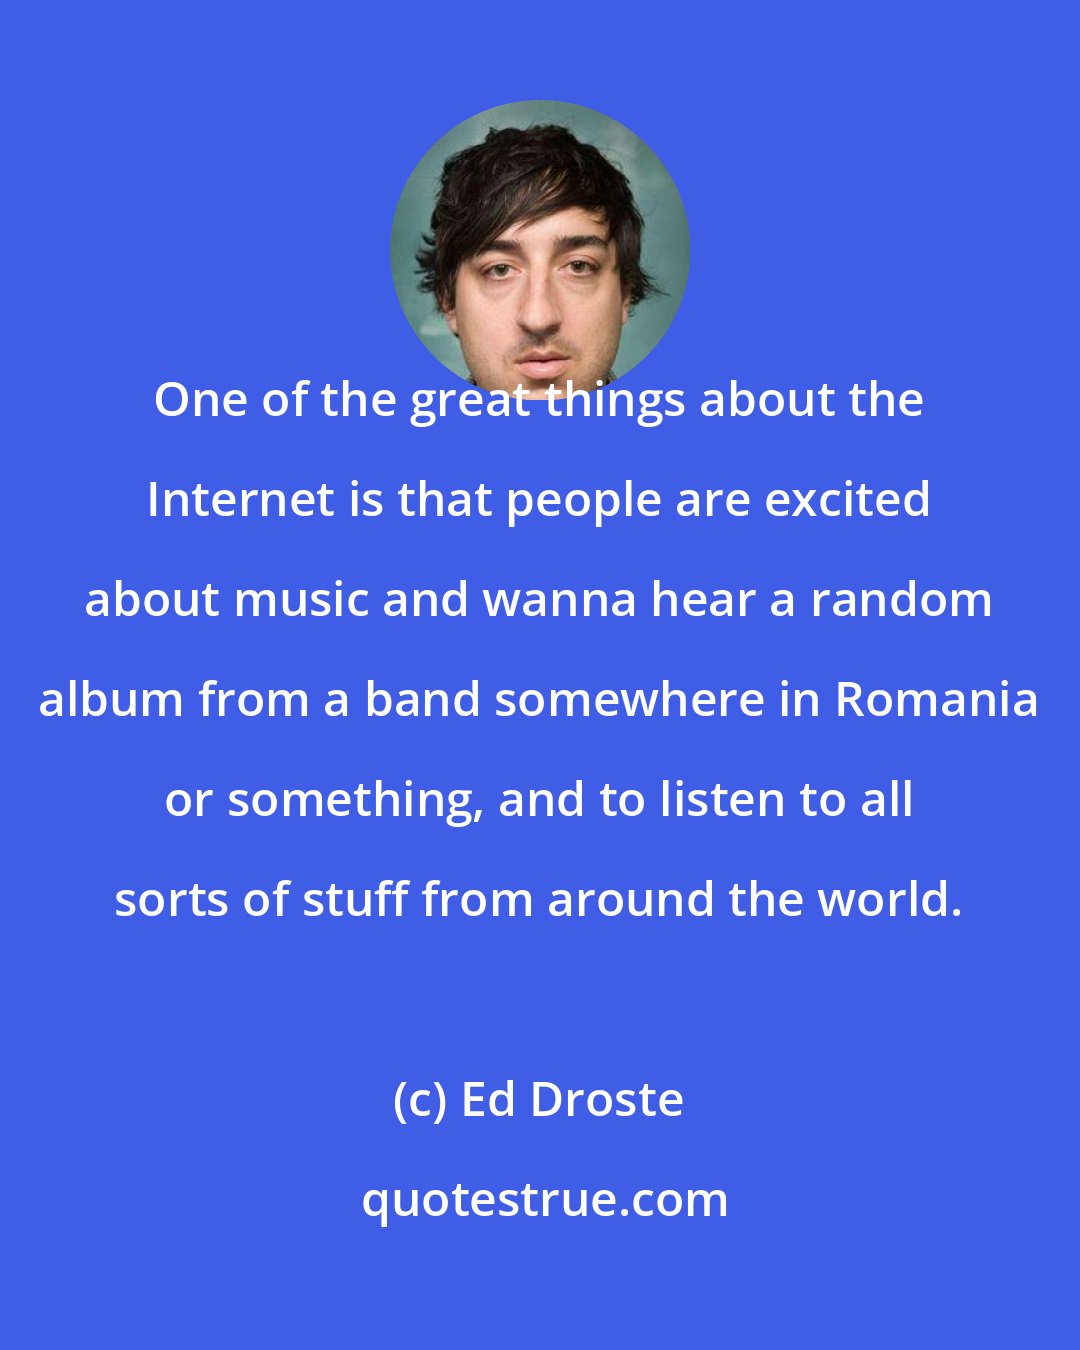 Ed Droste: One of the great things about the Internet is that people are excited about music and wanna hear a random album from a band somewhere in Romania or something, and to listen to all sorts of stuff from around the world.